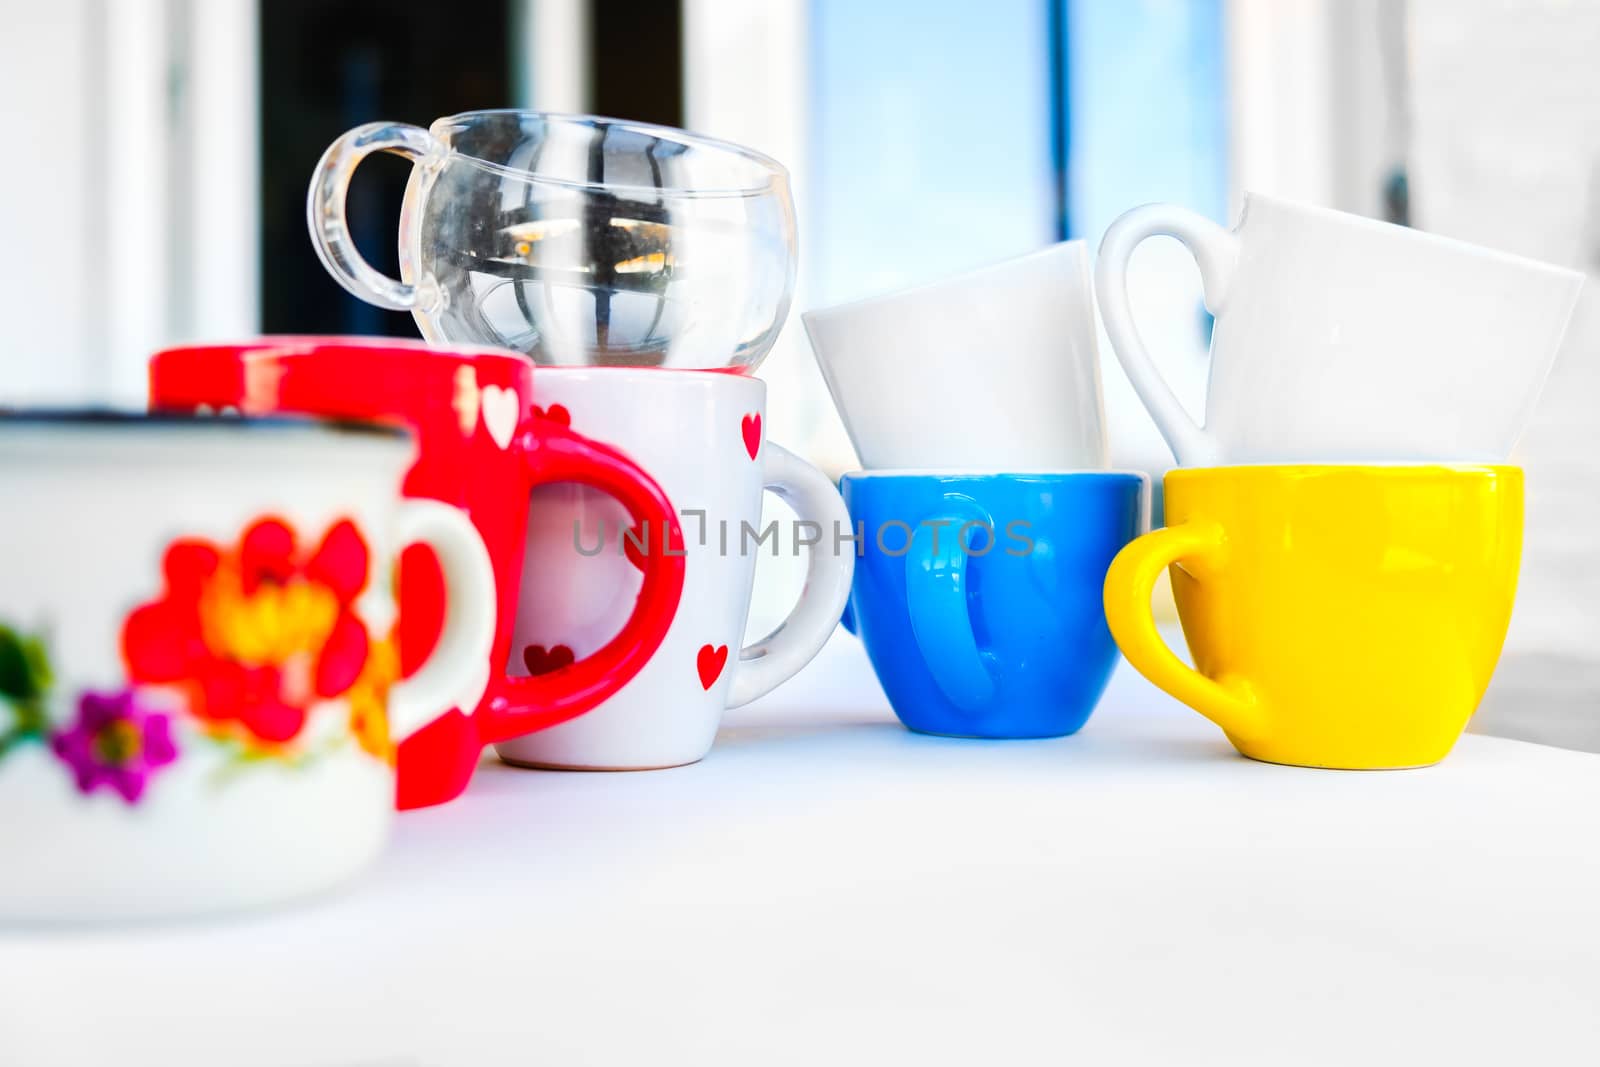 espresso cups with retro elements design by LucaLorenzelli